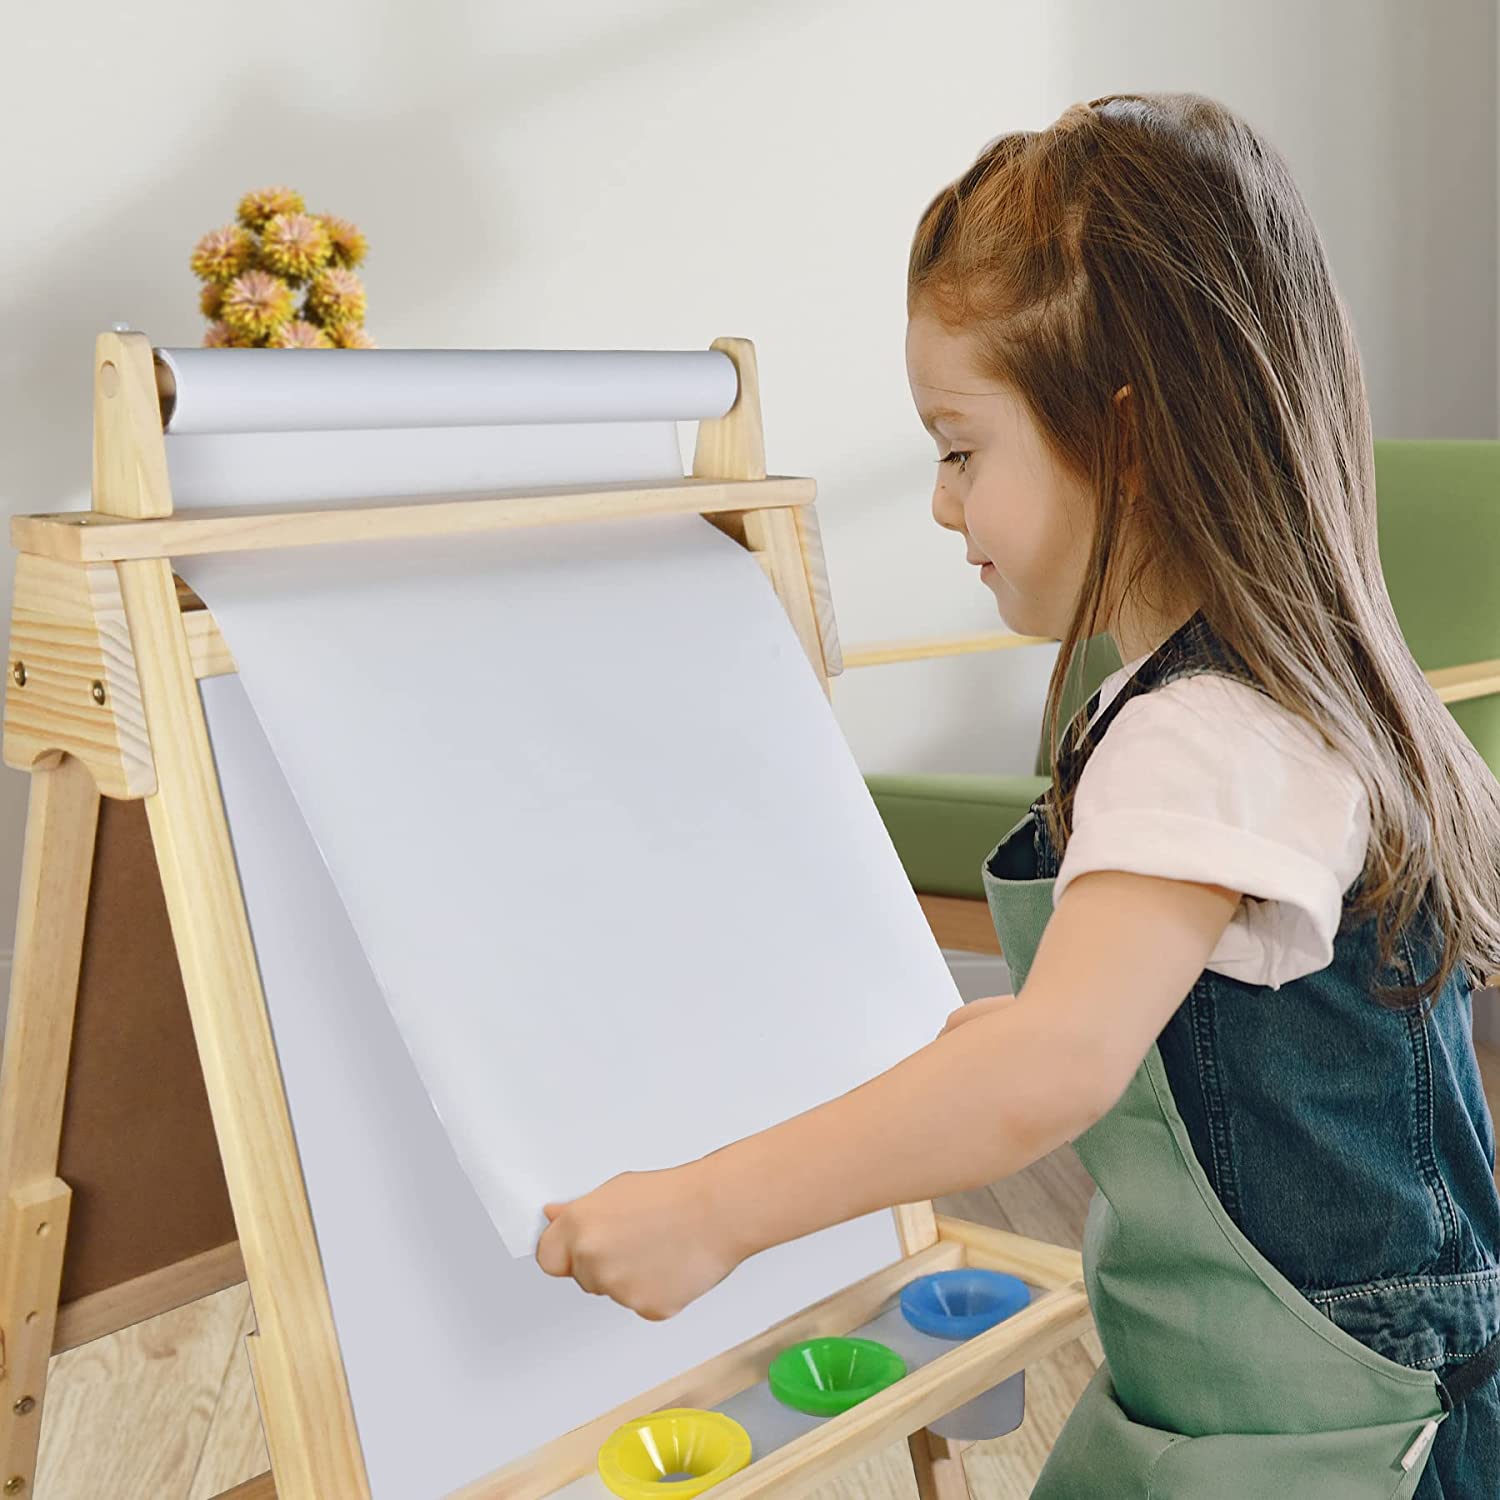 Kids Art Easel with Paper Roll Double Sided Chalkboard and